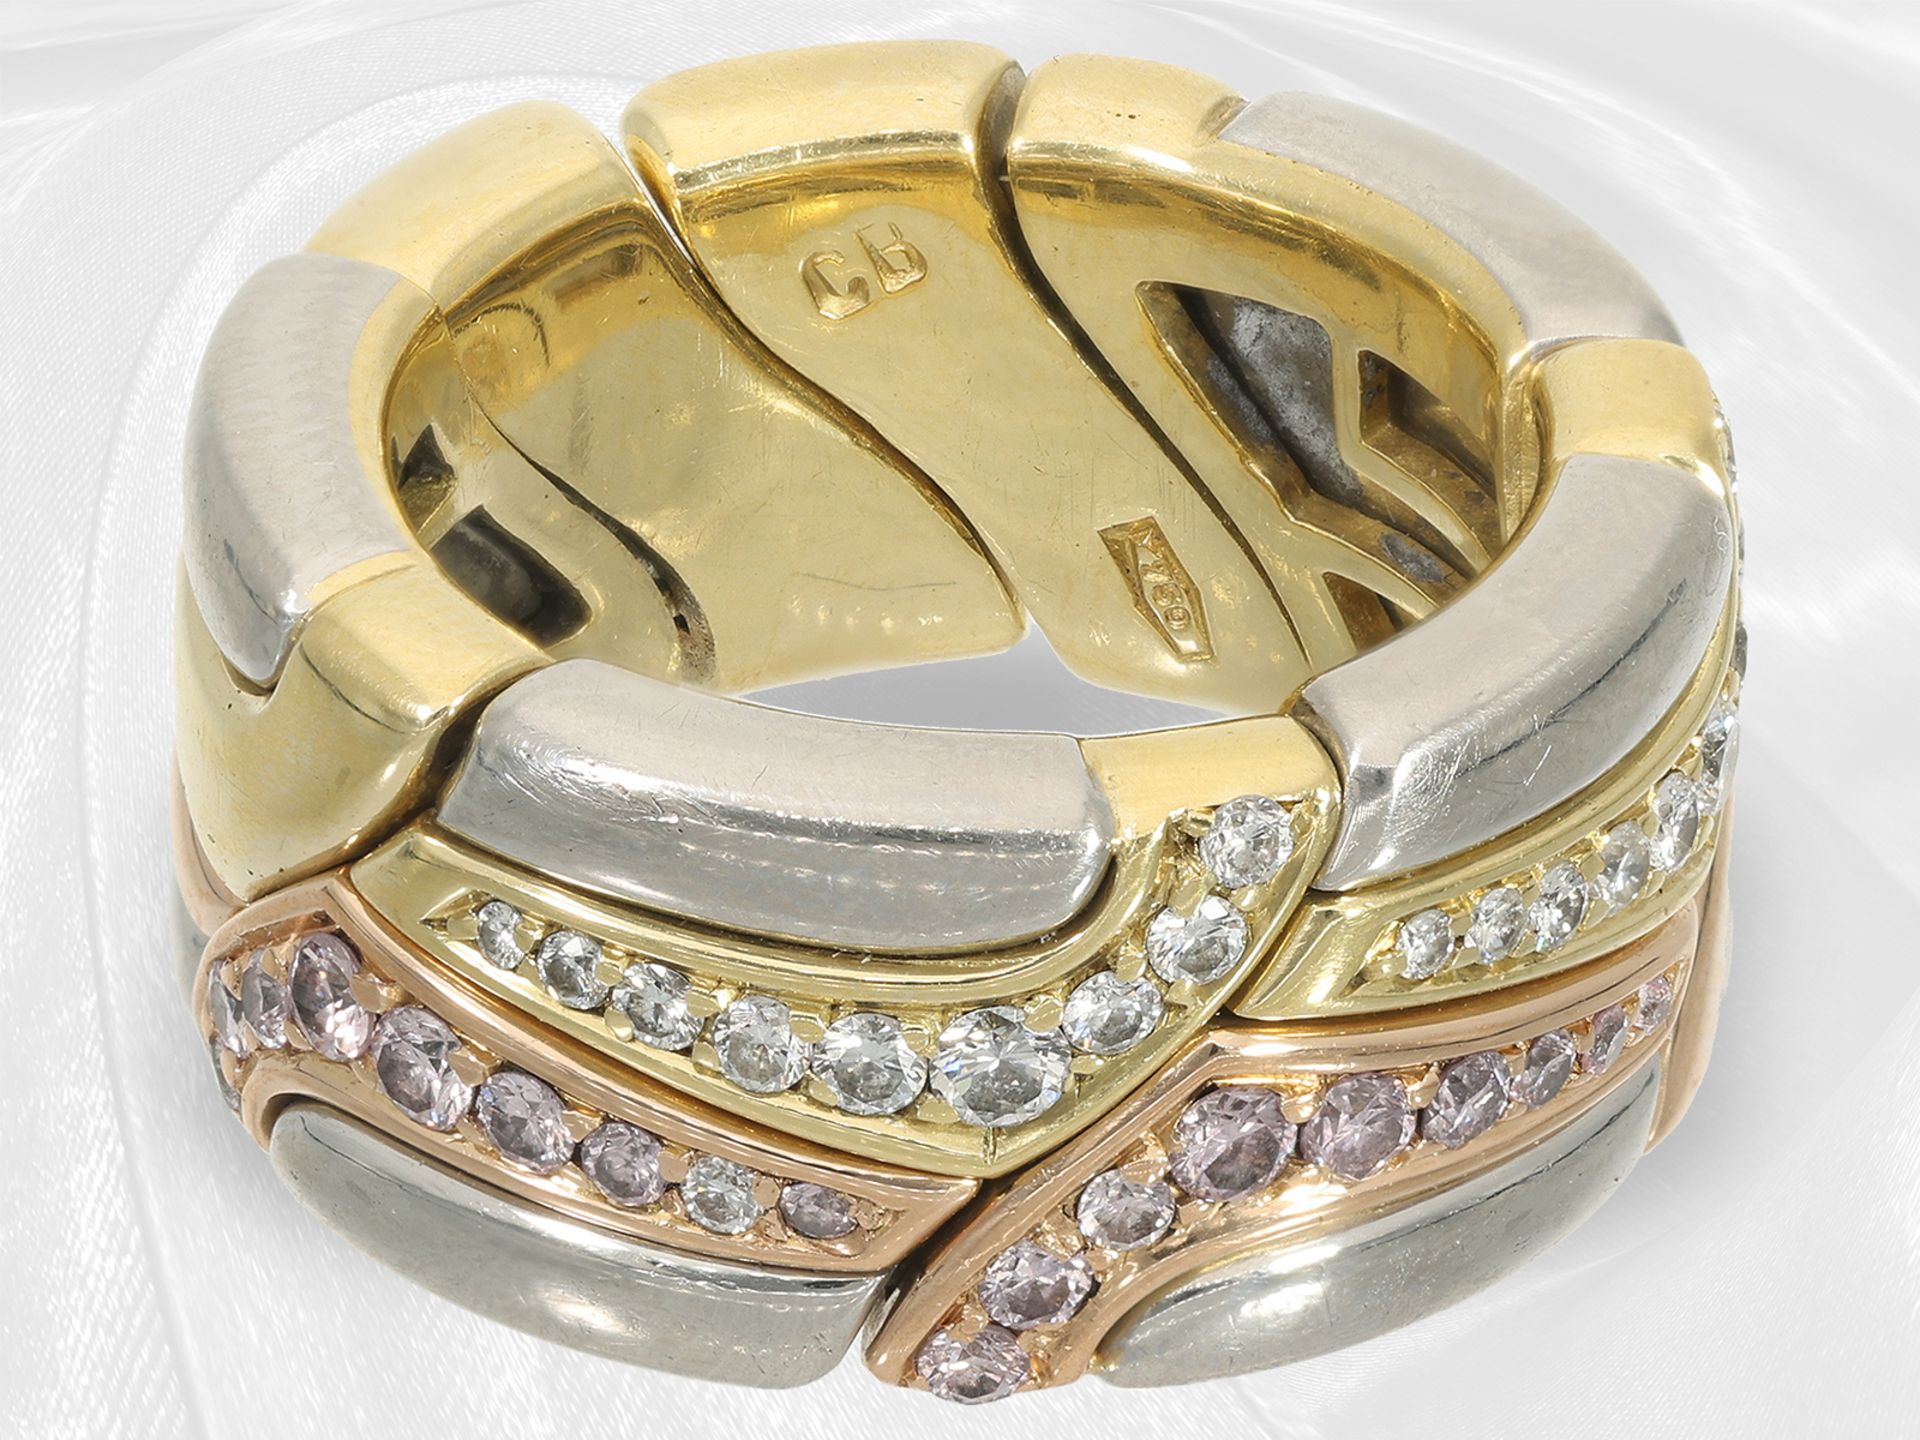 Highly refined designer goldsmith's work by Bucherer, ladies' ring model "Swan River", pink and whit - Image 2 of 3